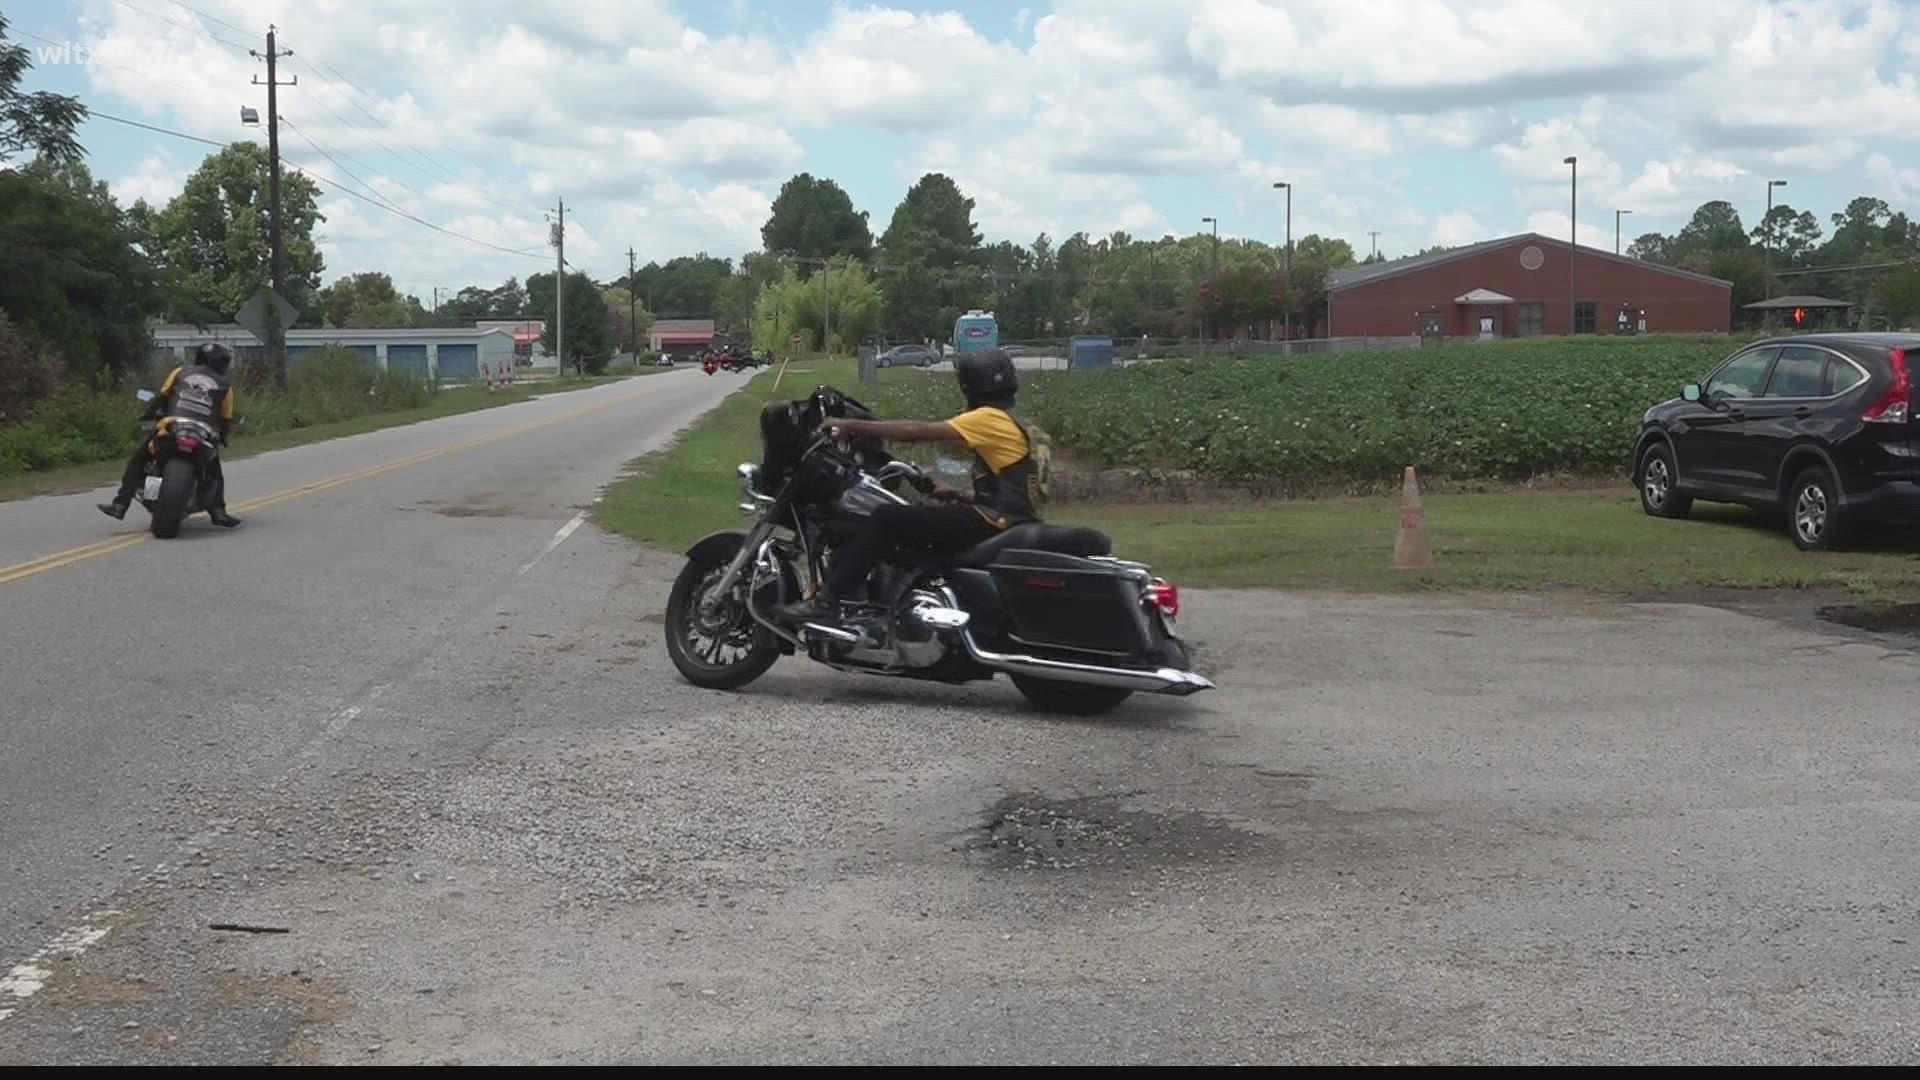 Motorcycle groups from across the Midlands headed to Bishopville to help raise money for the Lee County Council on Aging.